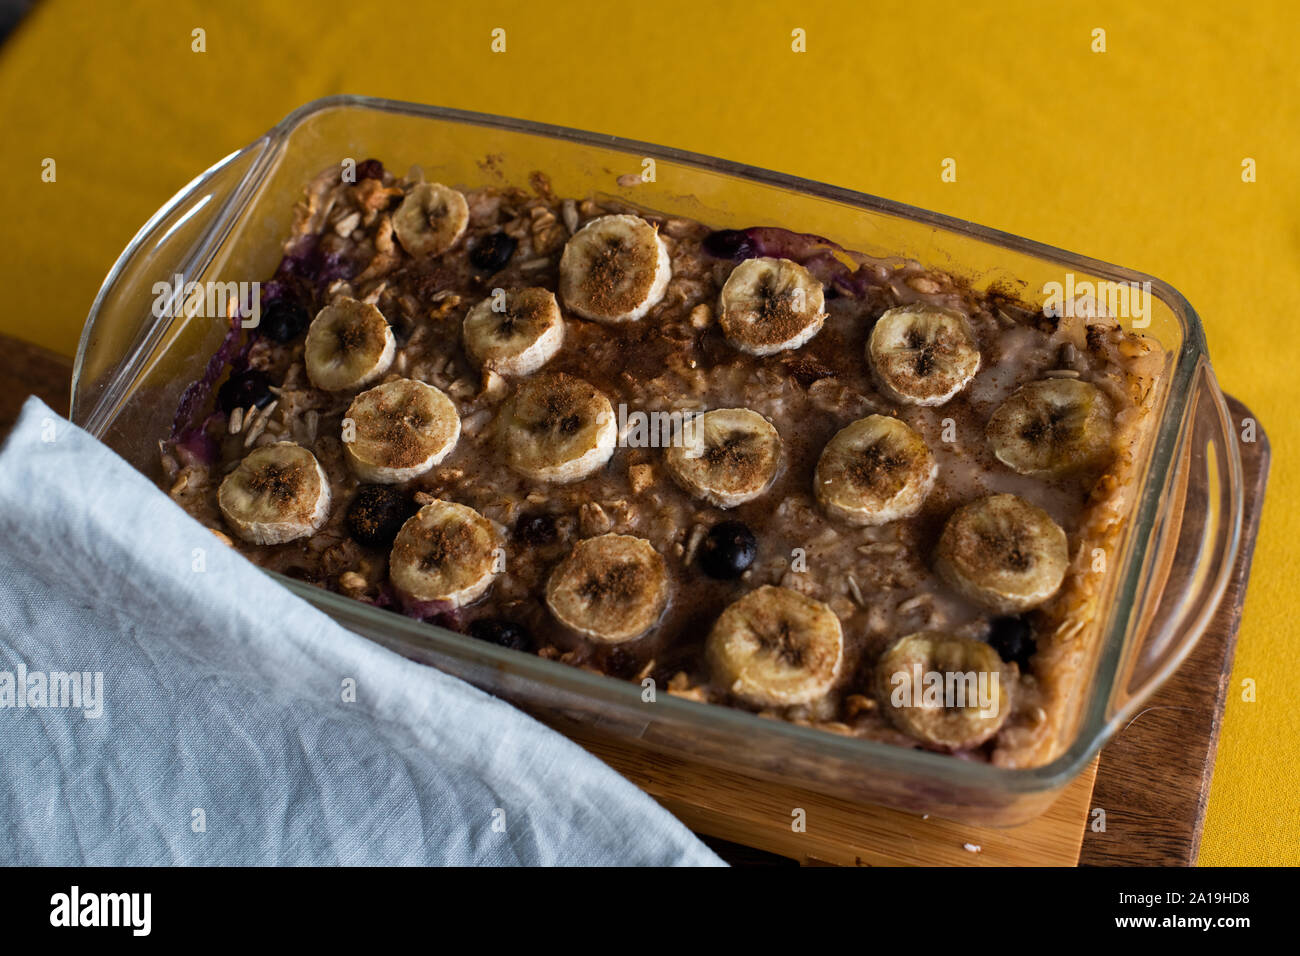 Baked oatmeal with bananas, blueberries, and walnuts. served in a glass bowl Stock Photo